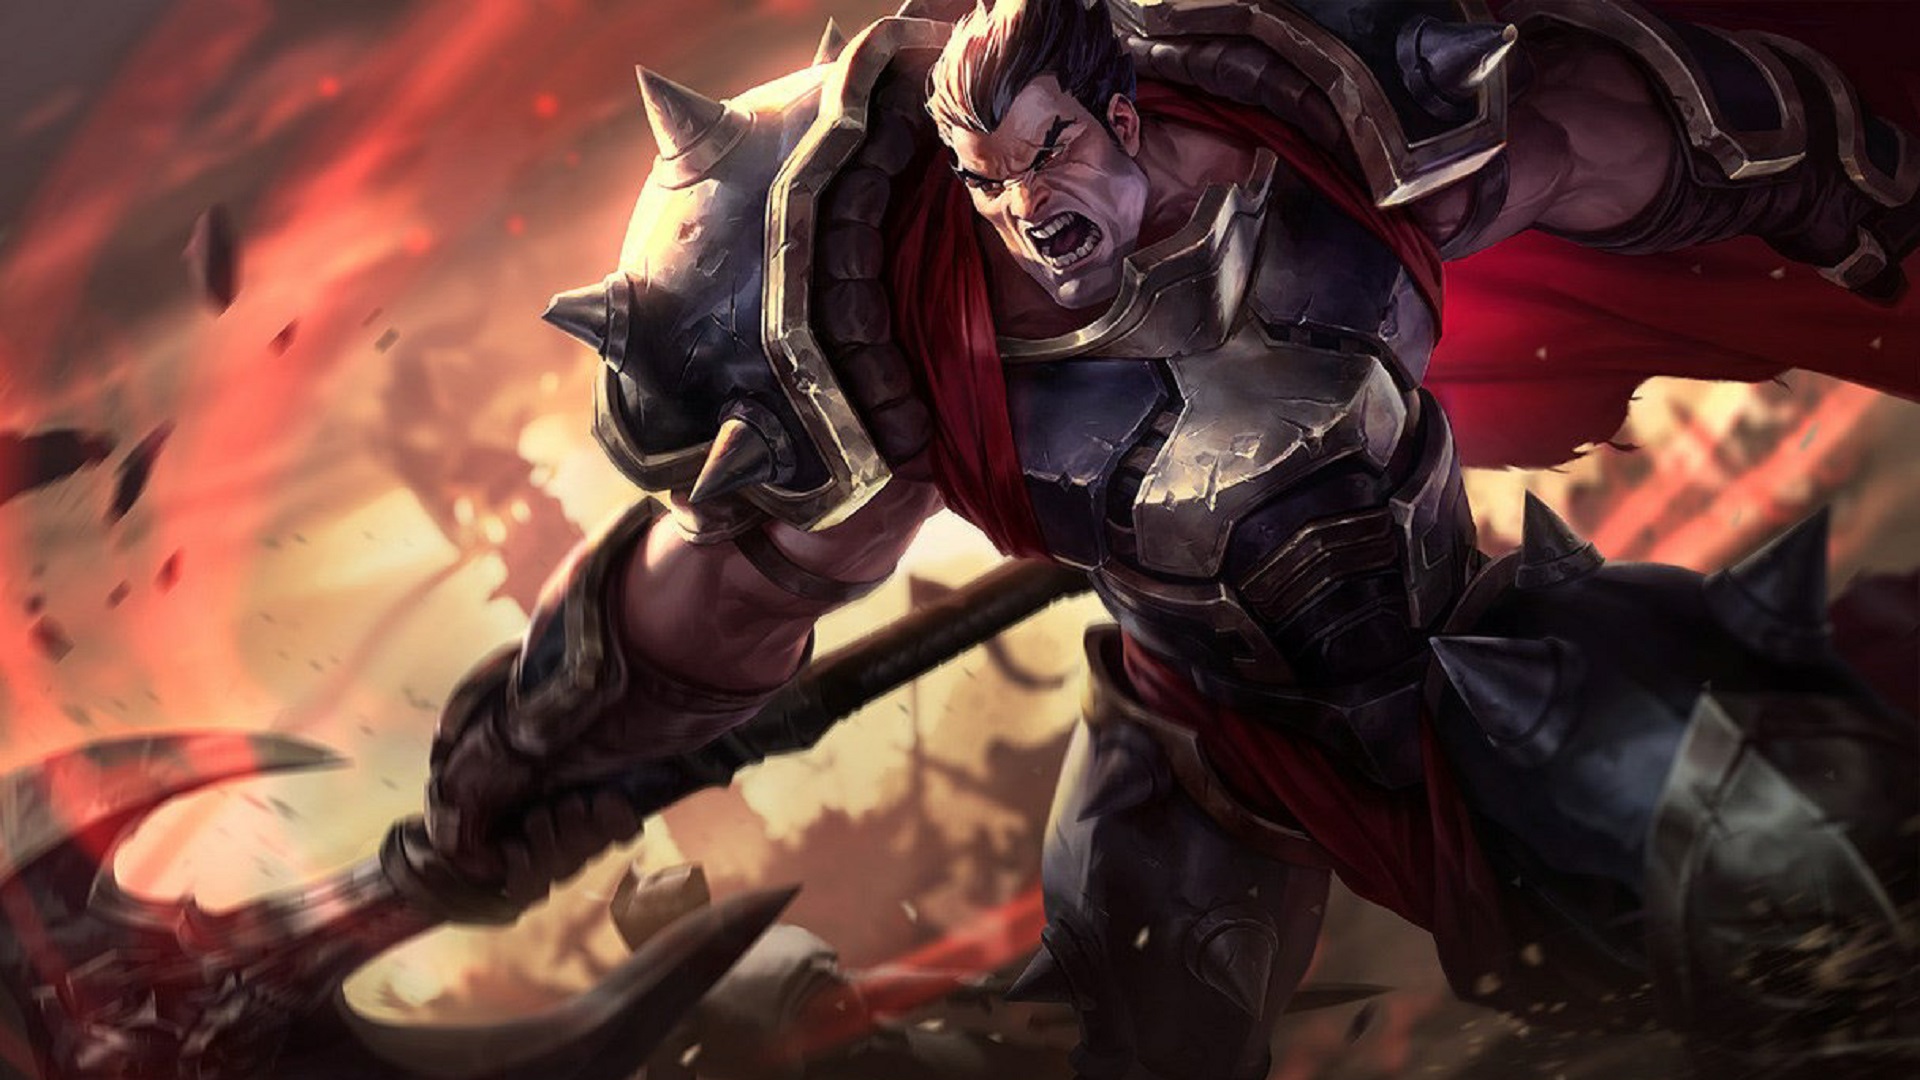 League of Legends Tier List April 2021 - Most picked and banned champions